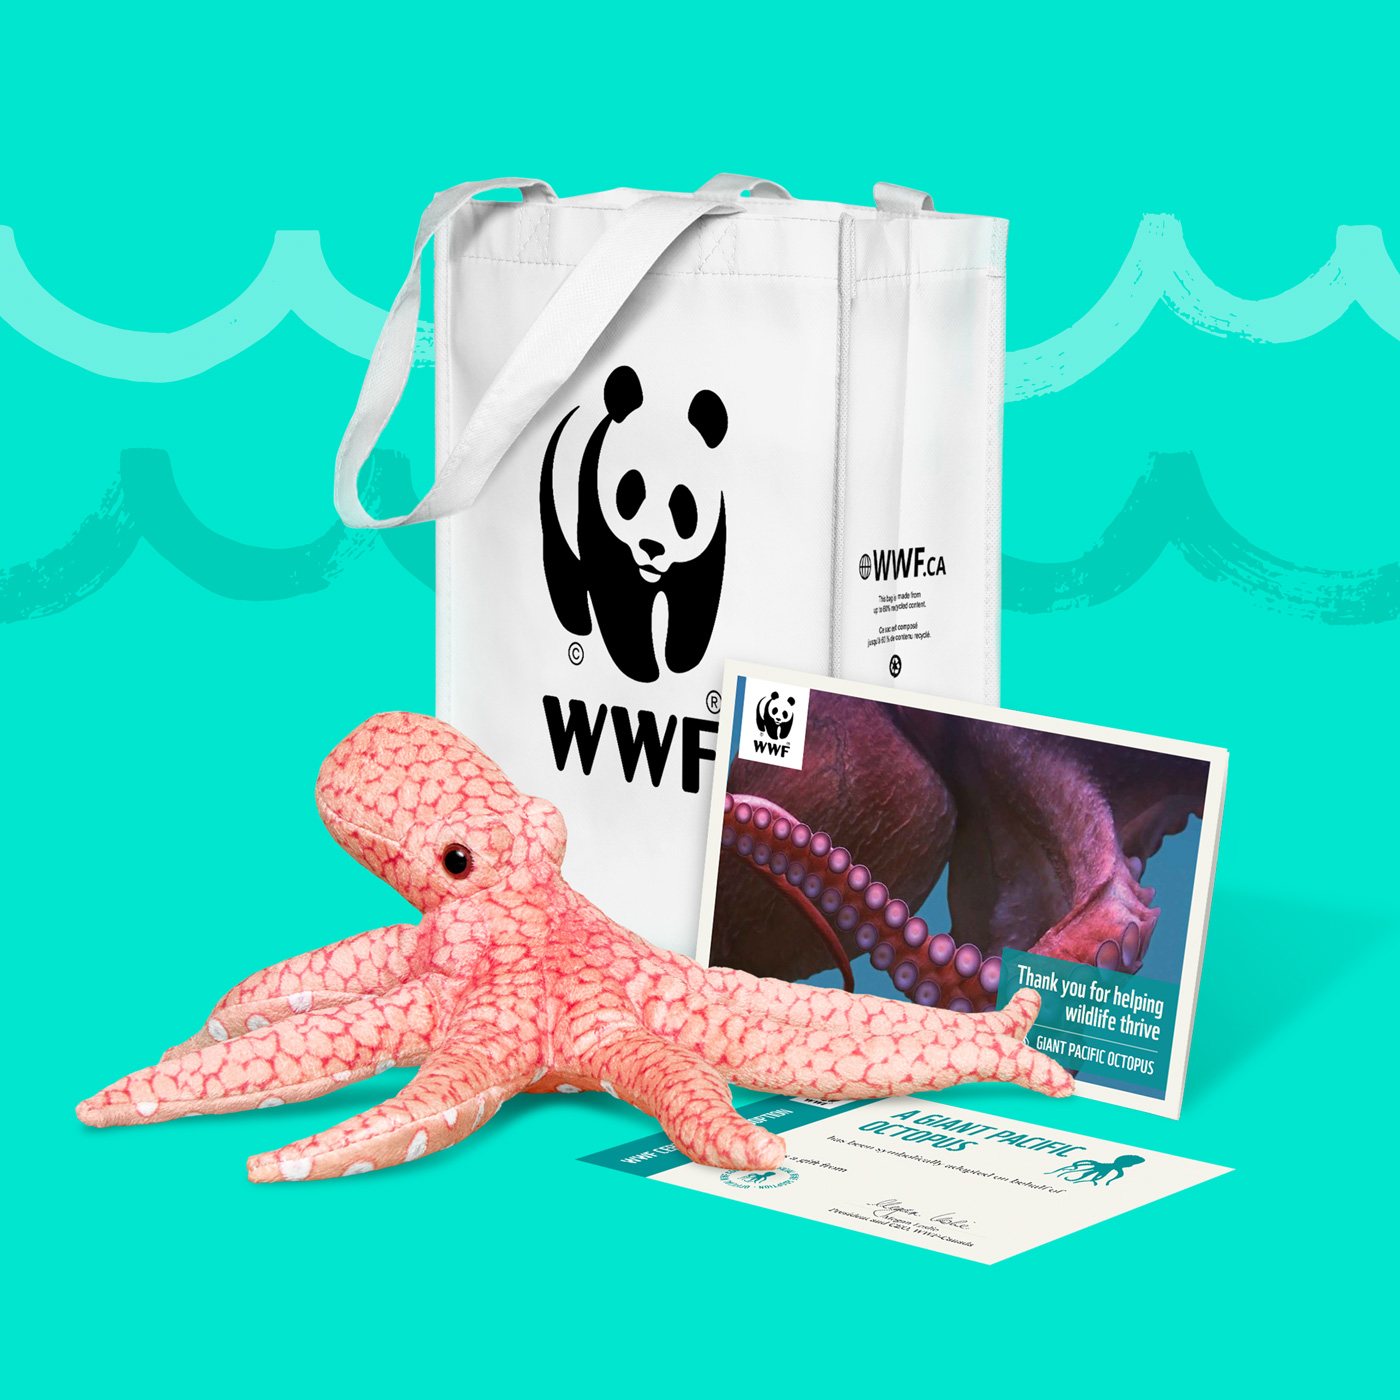 A plush octopus beside a WWF-branded bag and an info pack